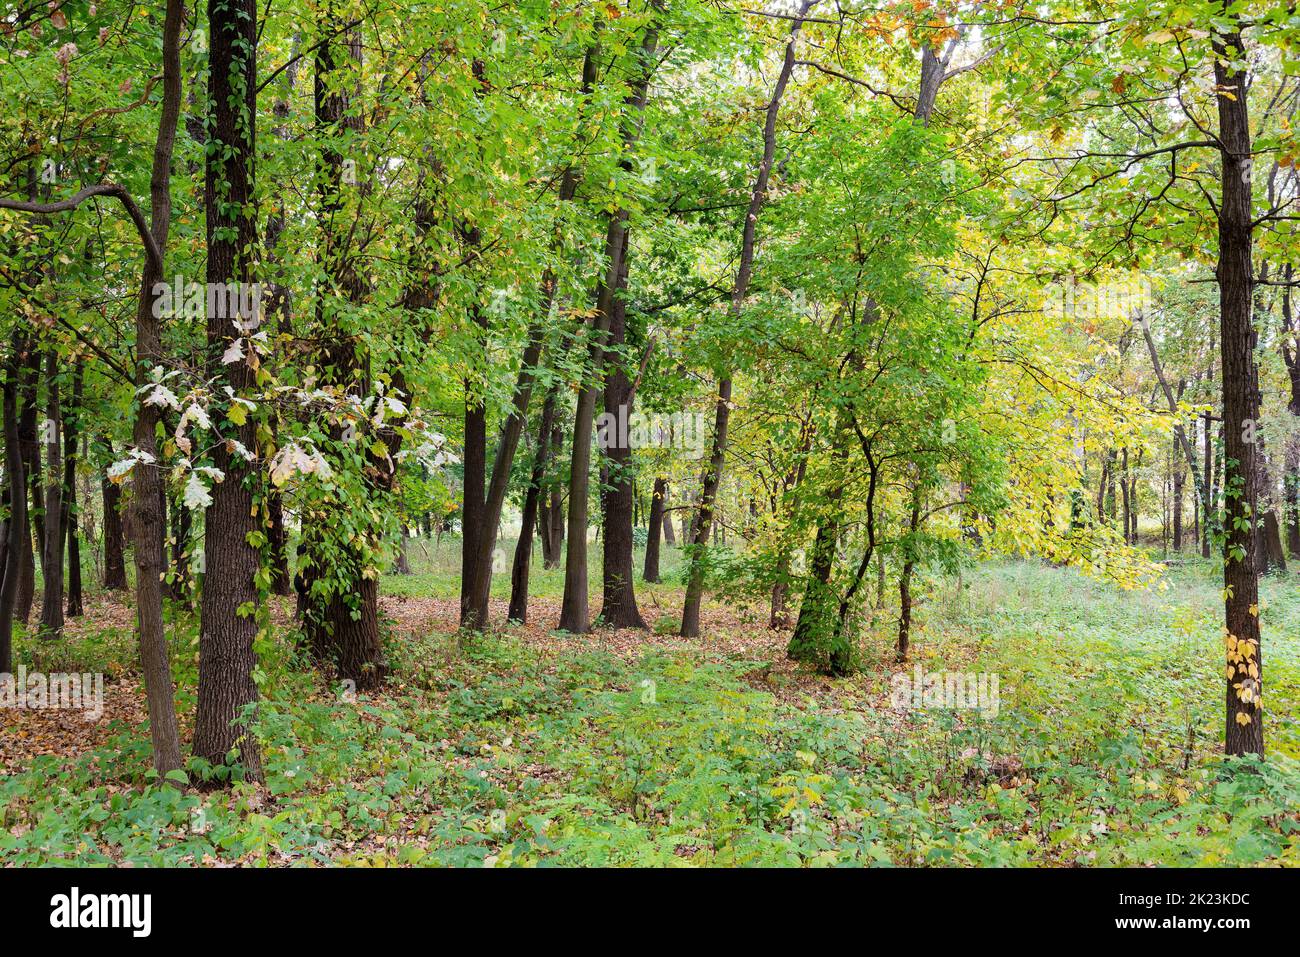 Inextricable forest between maple, oak and poplar trees in a sunny autumn day Stock Photo